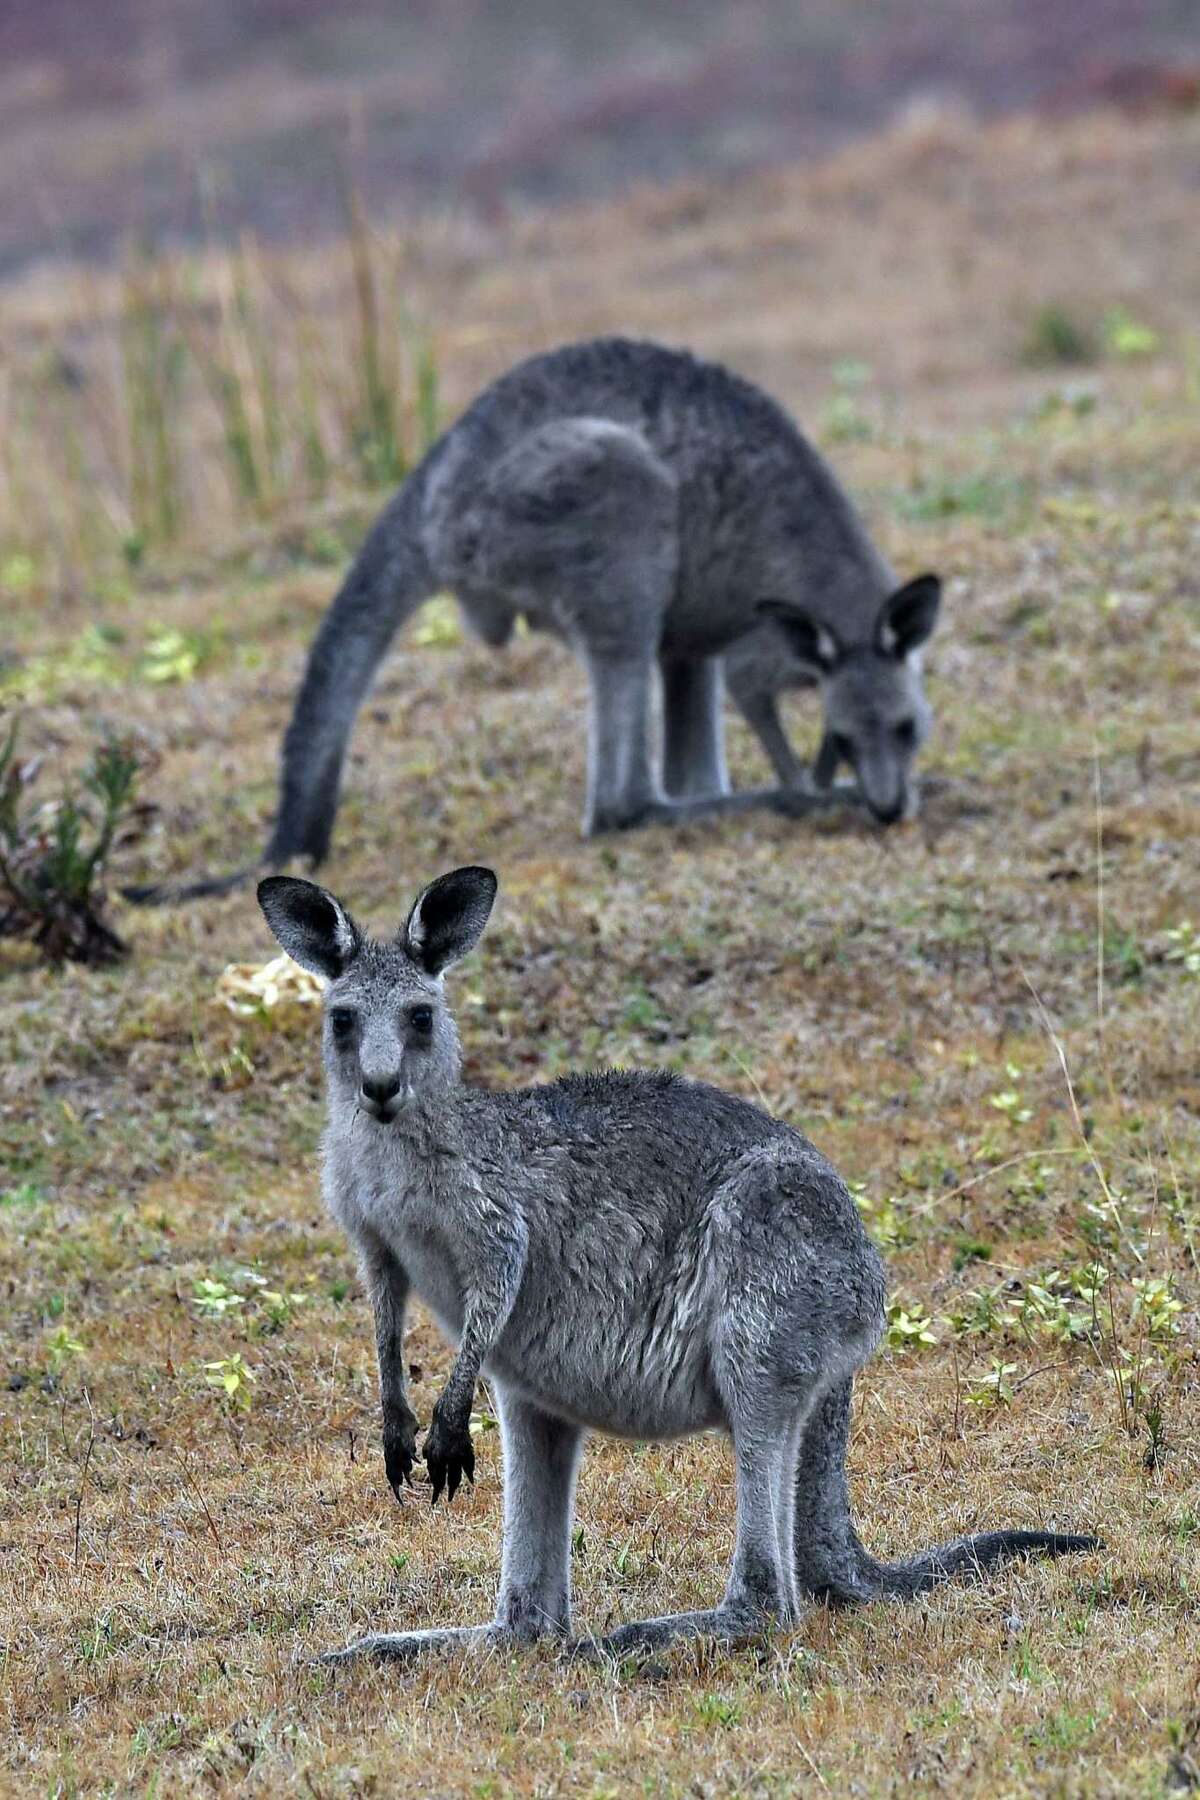 Kangaroos move close to a residential area from bushland in Australia’s New South Wales this month as massive bushfires continue to burn. As wildlife suffers because of climate change and human activity, one reader calls for action.